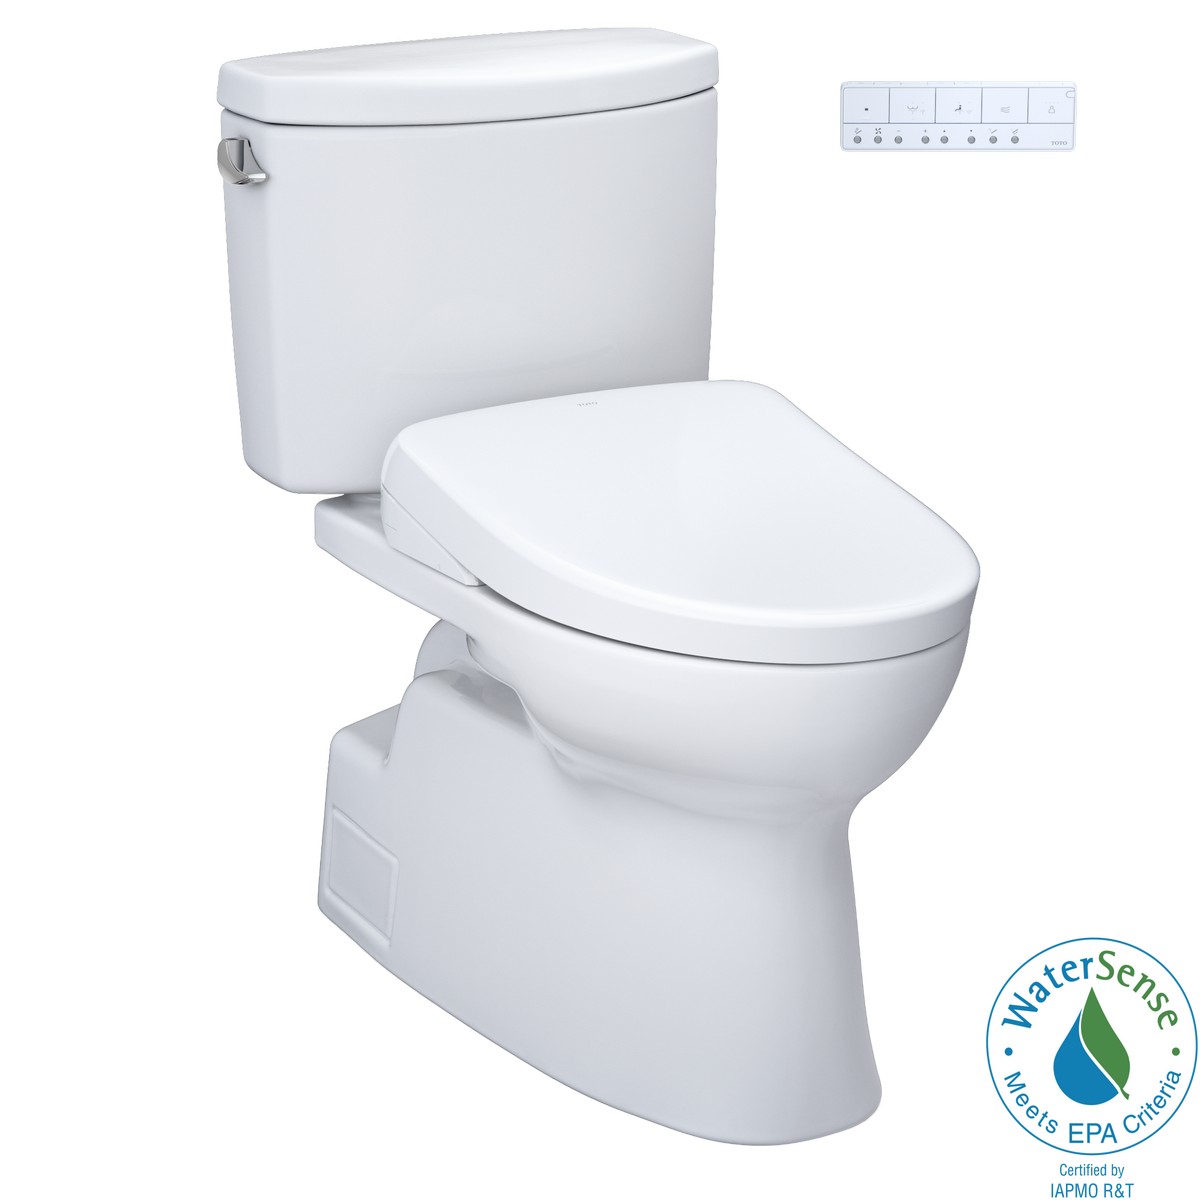 TOTO MW4744736CEF#01 WASHLET+ VESPIN II 1.28 GPF TWO PIECE ELONGATED TOILET WITH WASHLET+ S7A BIDET SEAT IN COTTON WHITE